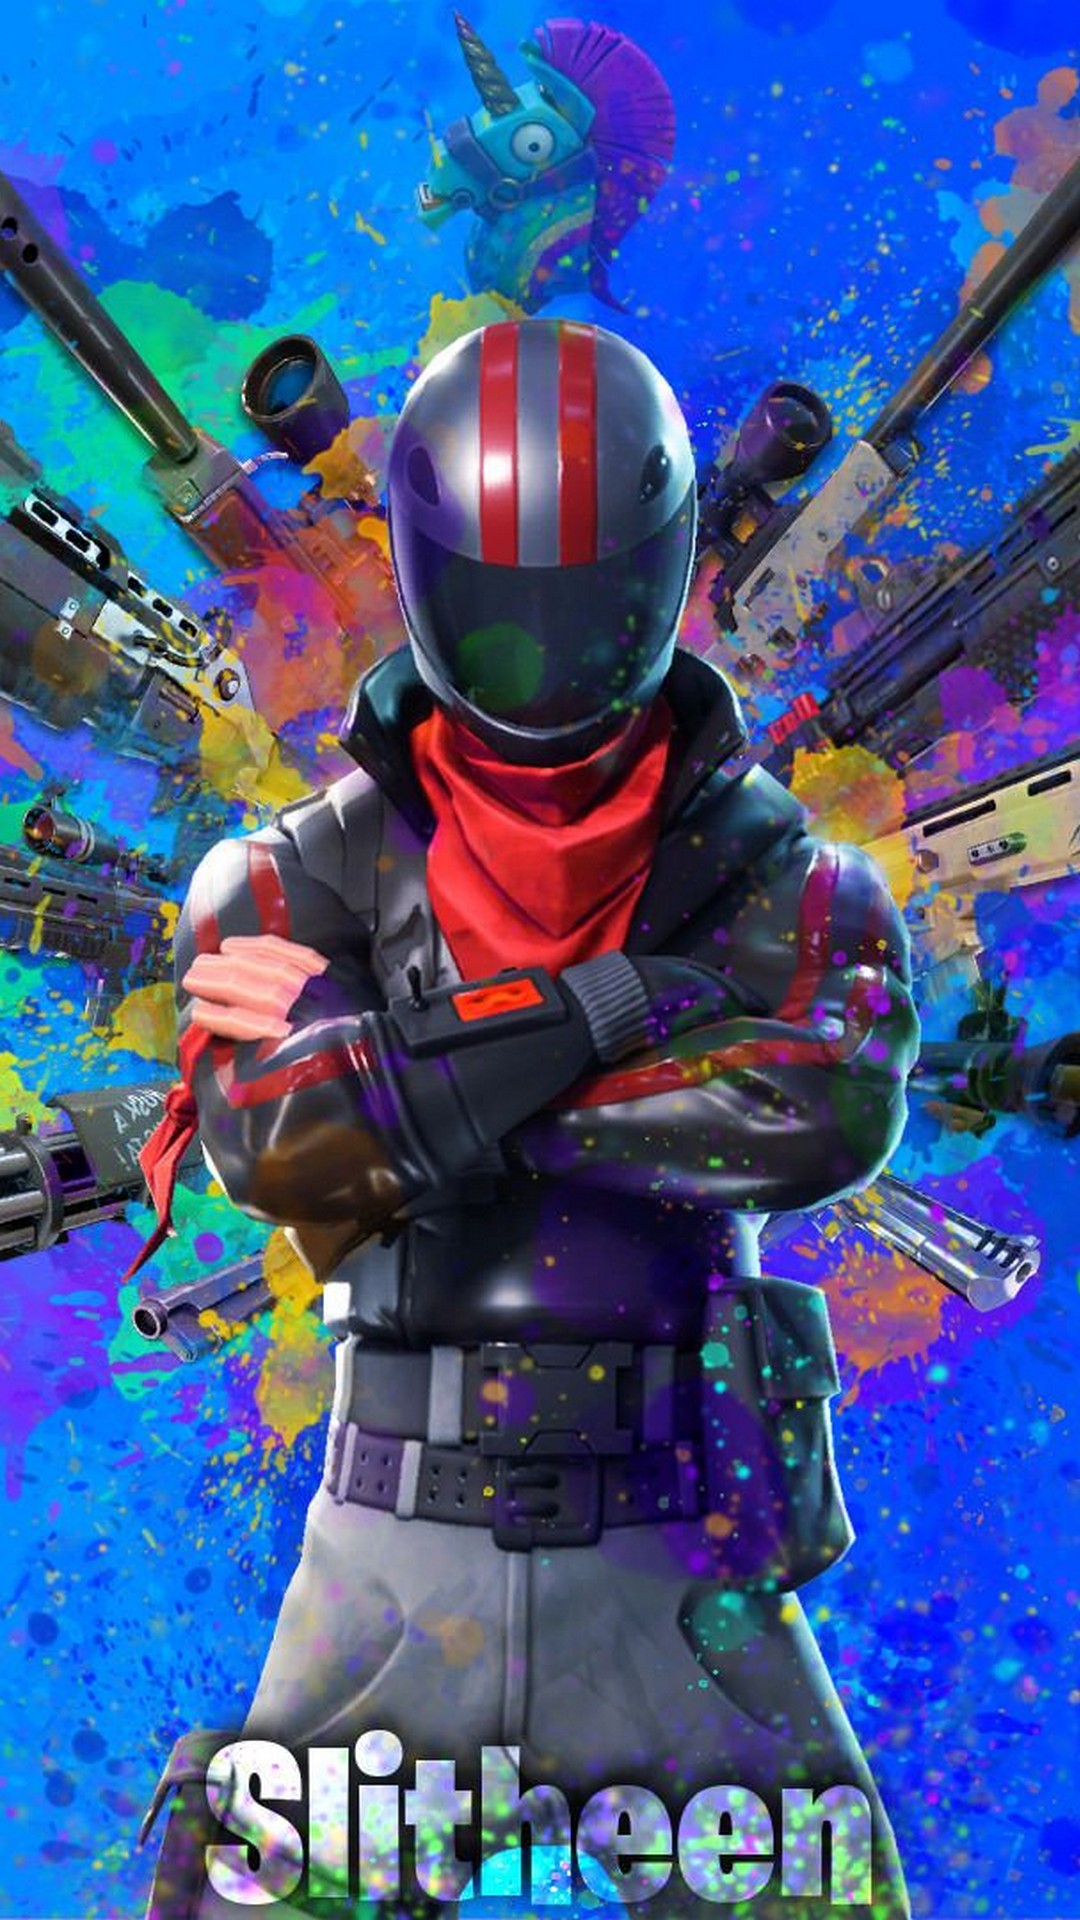 Fortnite Wallpaper for Phones with high-resolution 1080x1920 pixel. Download all Mobile Wallpapers and Use them as wallpapers for your iPhone, Tablet, iPad, Android and other mobile devices